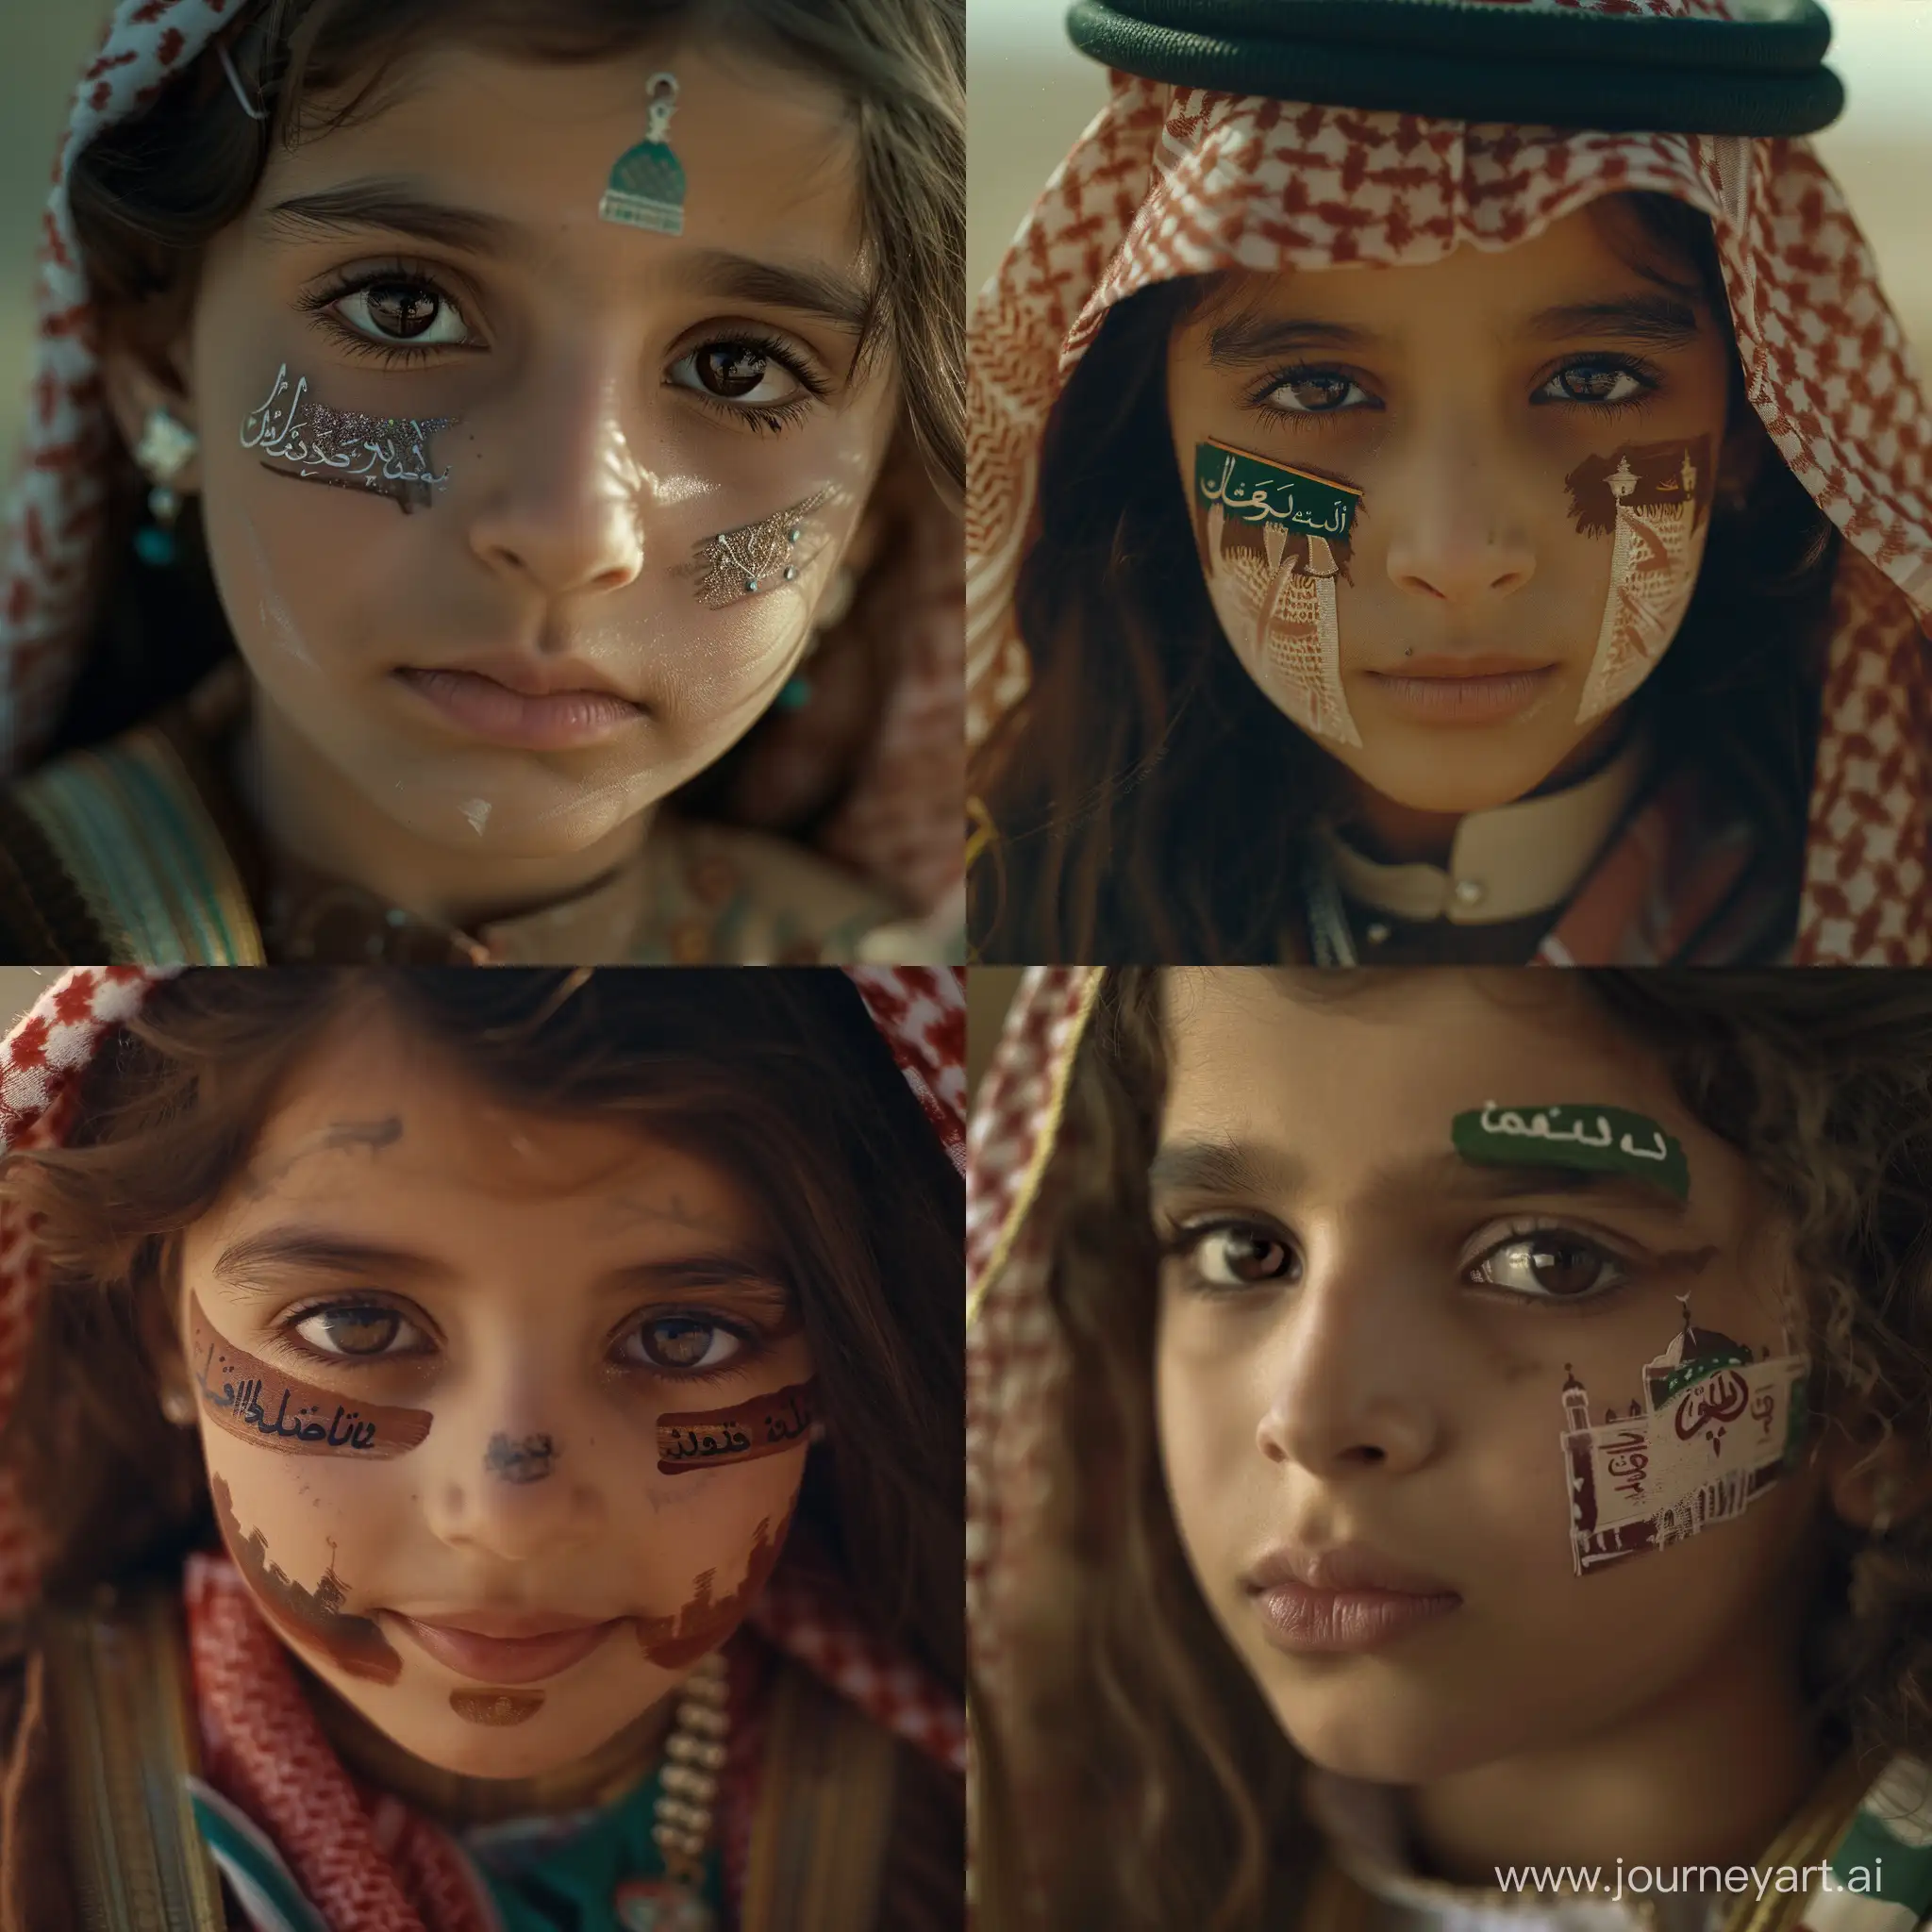 The opening image is of a 10-year-old Saudi girl with brown hair and brown eyes, wearing traditional Saudi dress on the occasion of Saudi Foundation Day, with Saudi Arabia painted on her face. Professional cinematography. Shallow depth of field, subject focus, professional color grading, fine dynamic motion, cine film, cine camera. Professionalism.